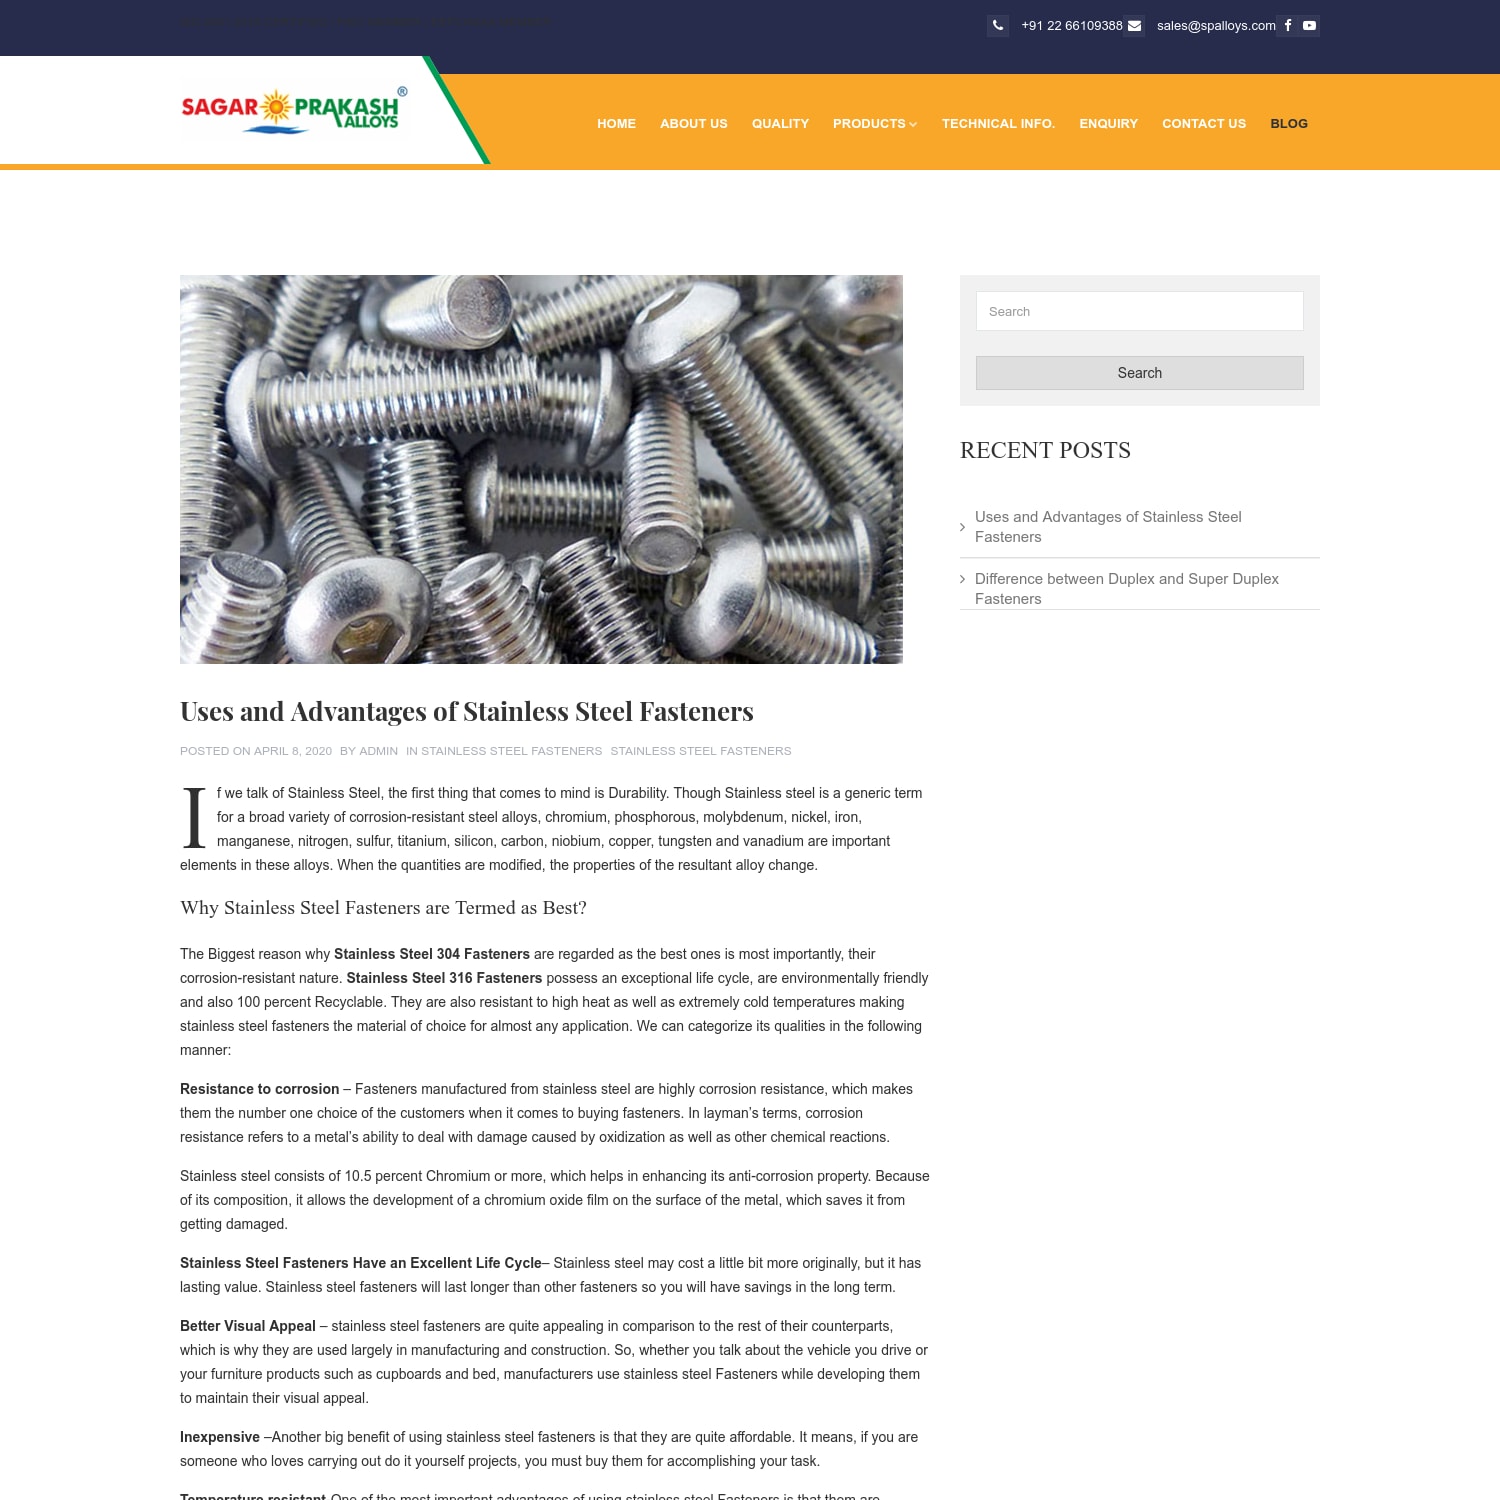 Uses and Advantages of Stainless Steel Fasteners - Sagar Prakash Alloys Blog